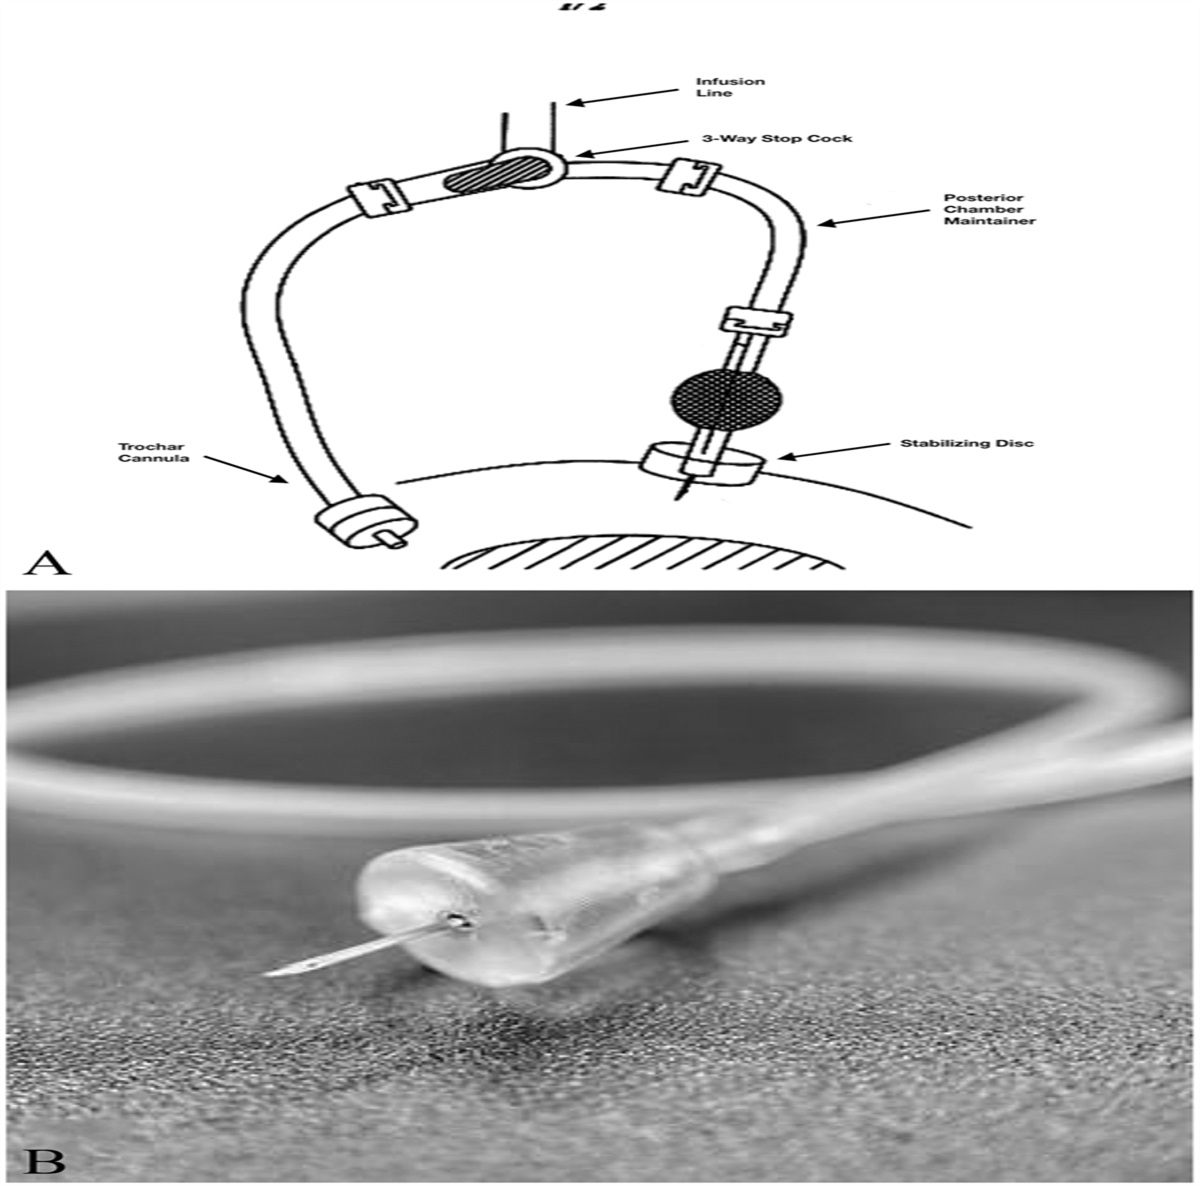 A 30 G “POSTERIOR CHAMBER MAINTAINER” FOR PREVENTION OF TRANSIENT HYPOTONY DURING SCLEROTOMY CLOSURE AT THE CONCLUSION OF 3-PORT PARS PLANA VITRECTOMY